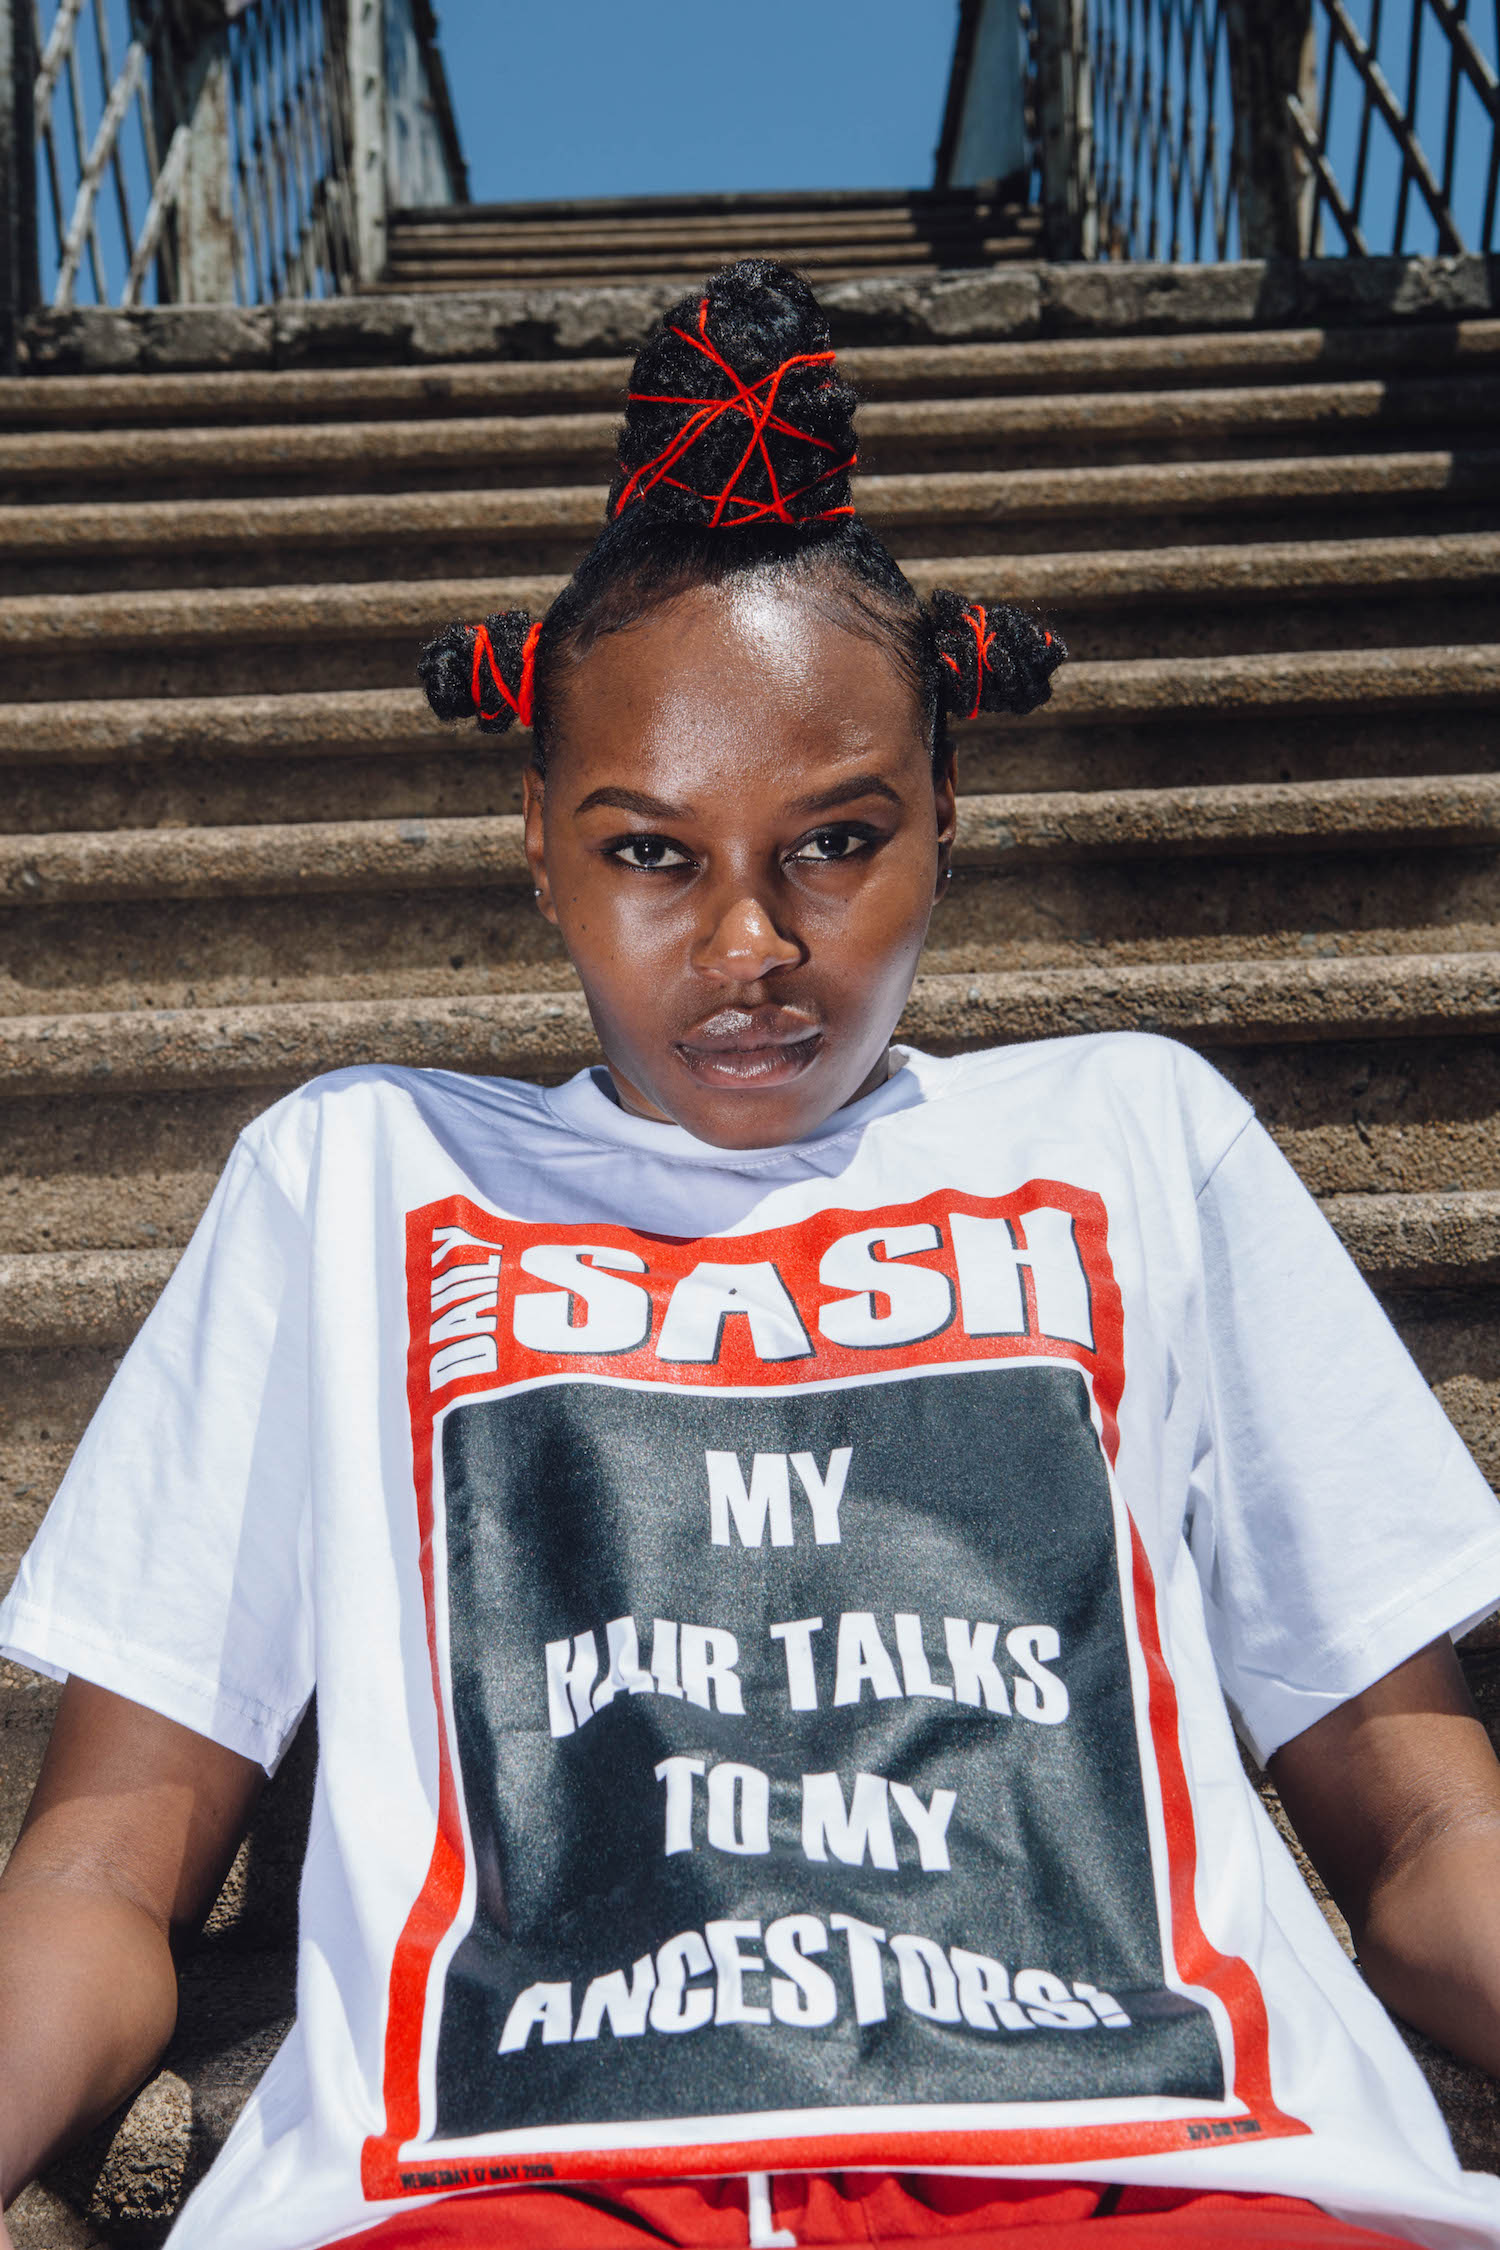 “My aura has been duplicated!” – A look at fashion brand SASH’s Daily ...